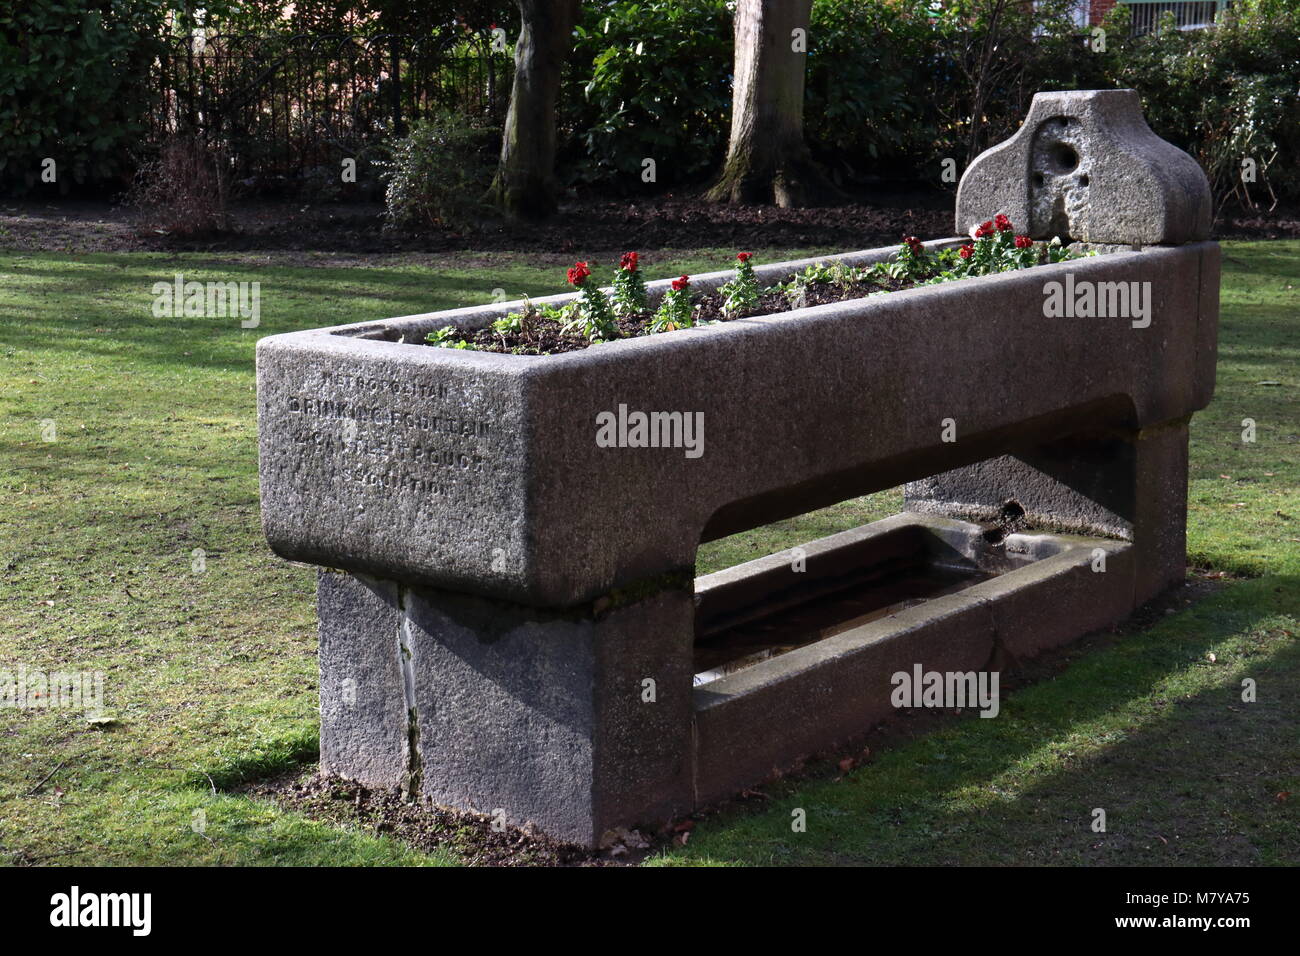 cattle trough next to old library, Worksop, Notts, UK Stock Photo